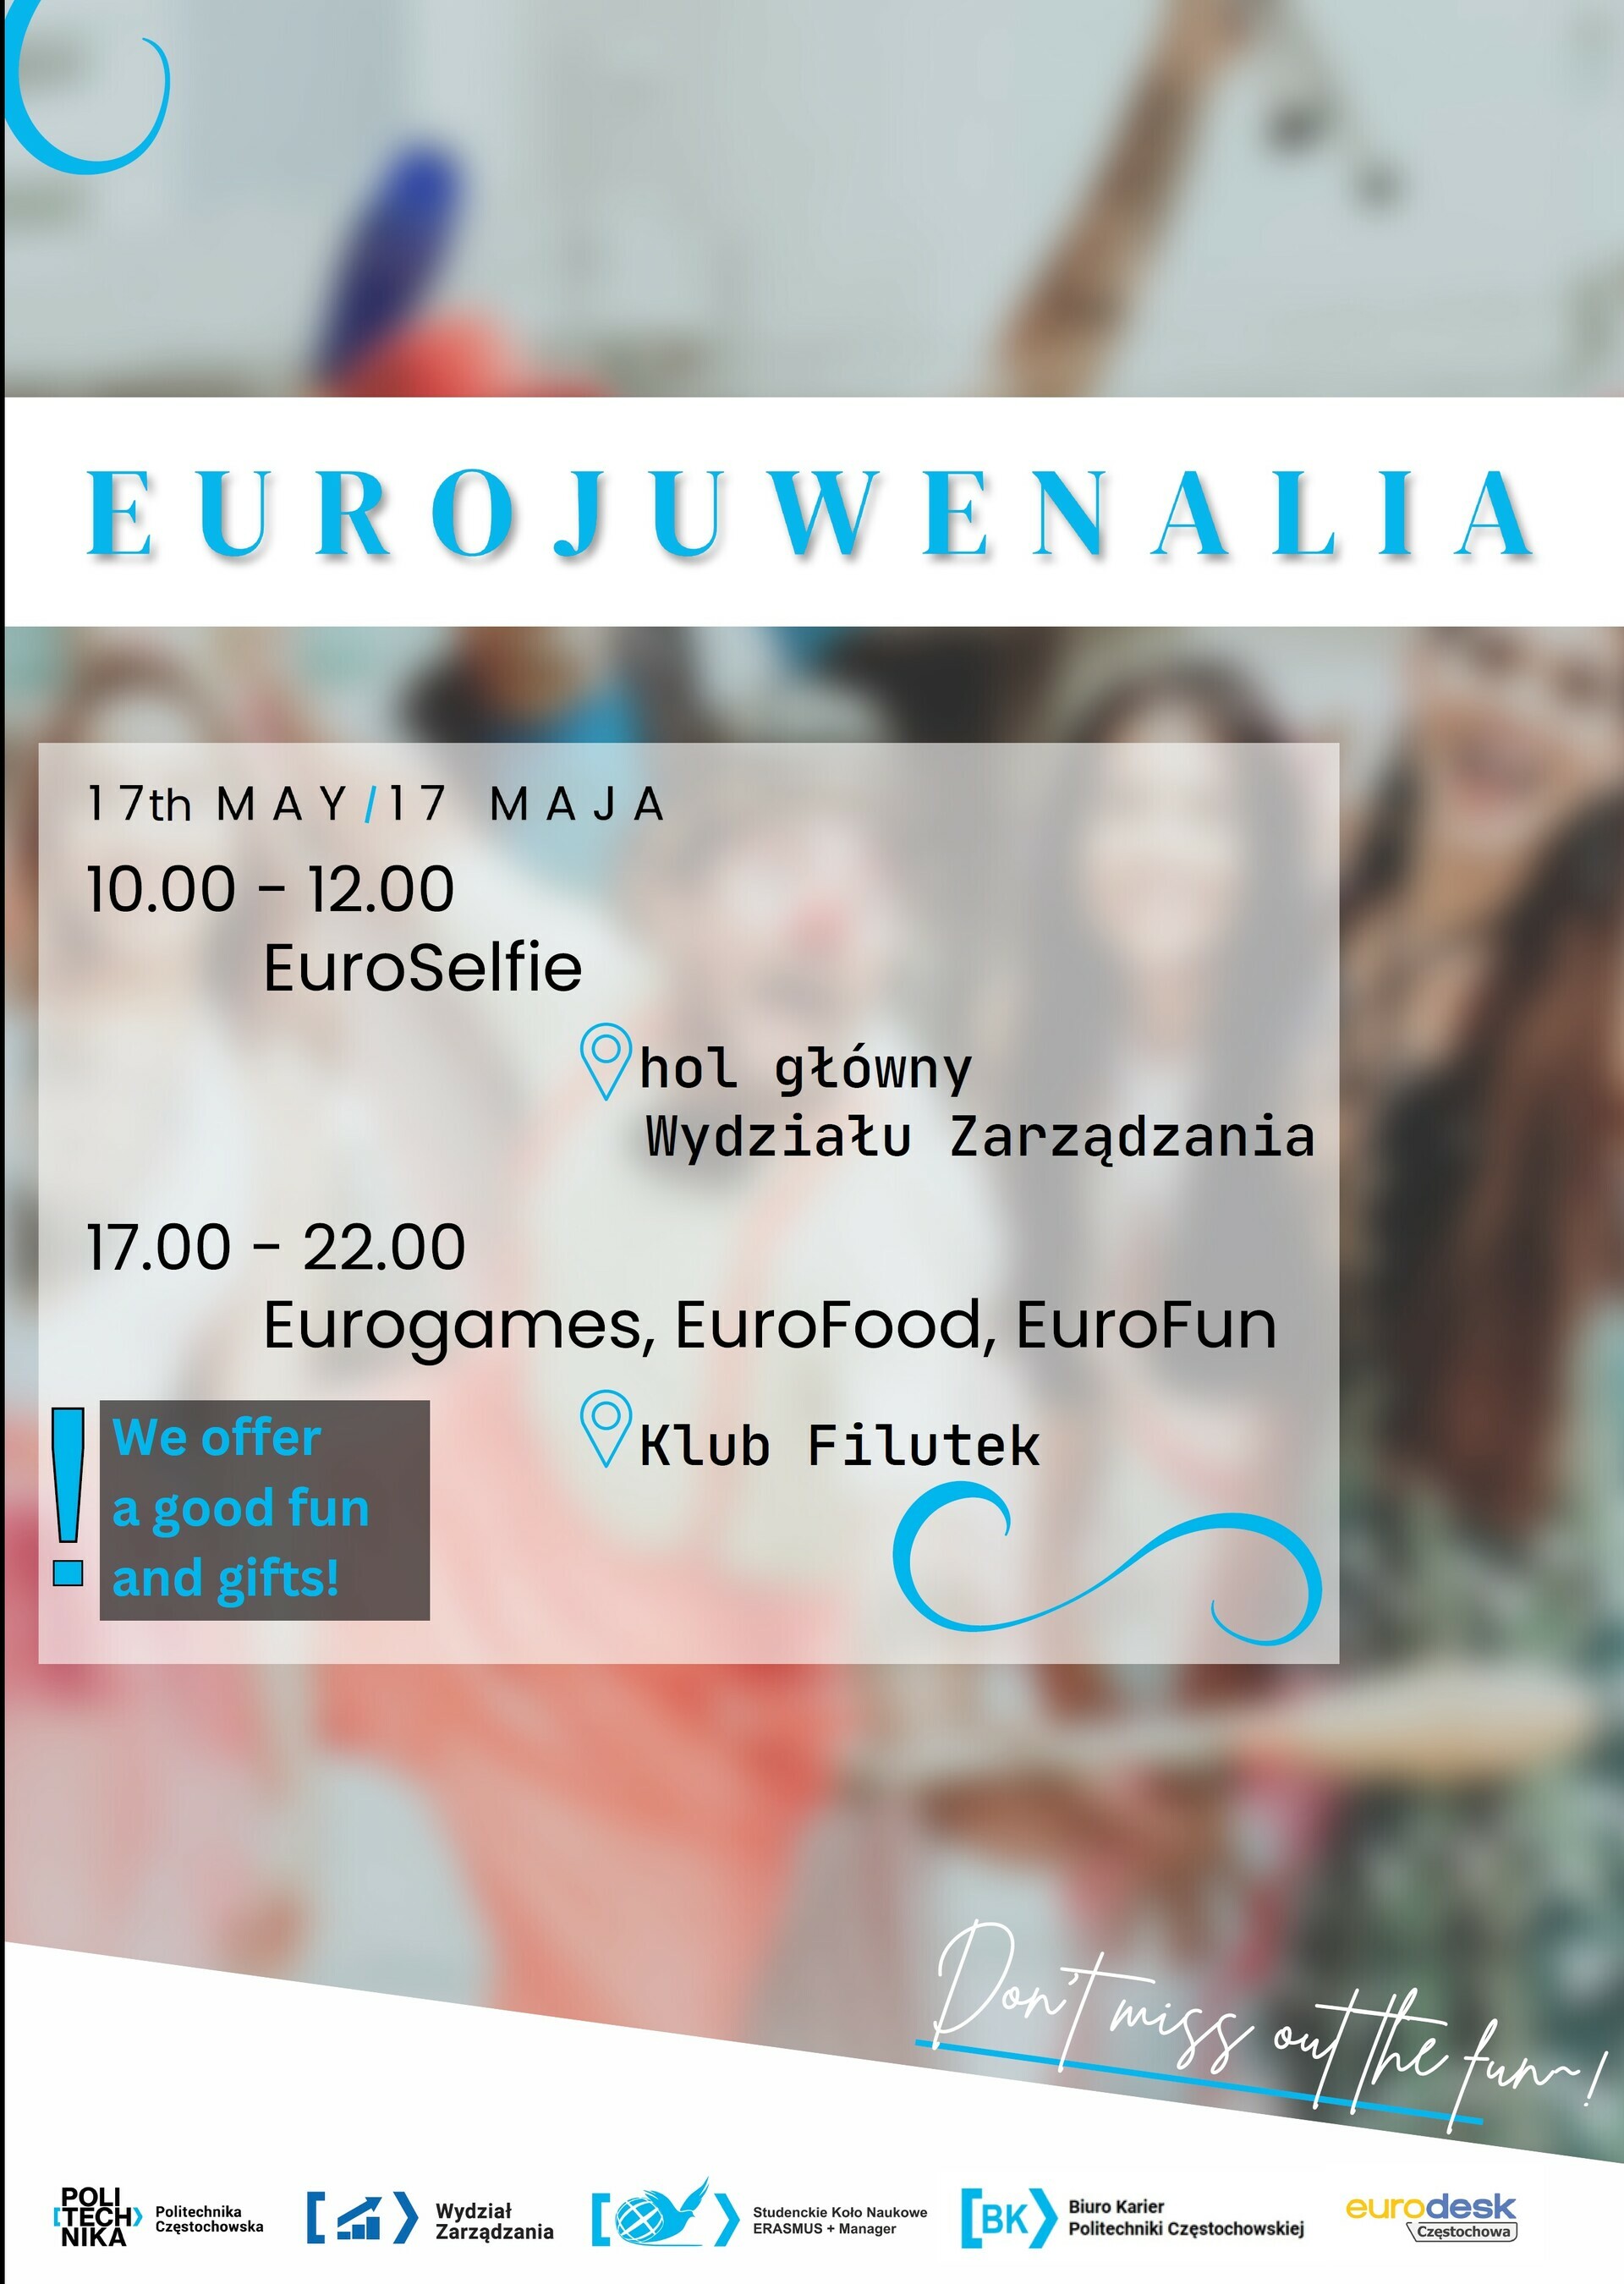 17th May 10.00 - 12.00 EuroSelfie - Faculty of Management Main Building 17.00 - 22.00 Eurogames, EuroFood, EuroFun - Students Club Filutek We offer a good fun and gifts!